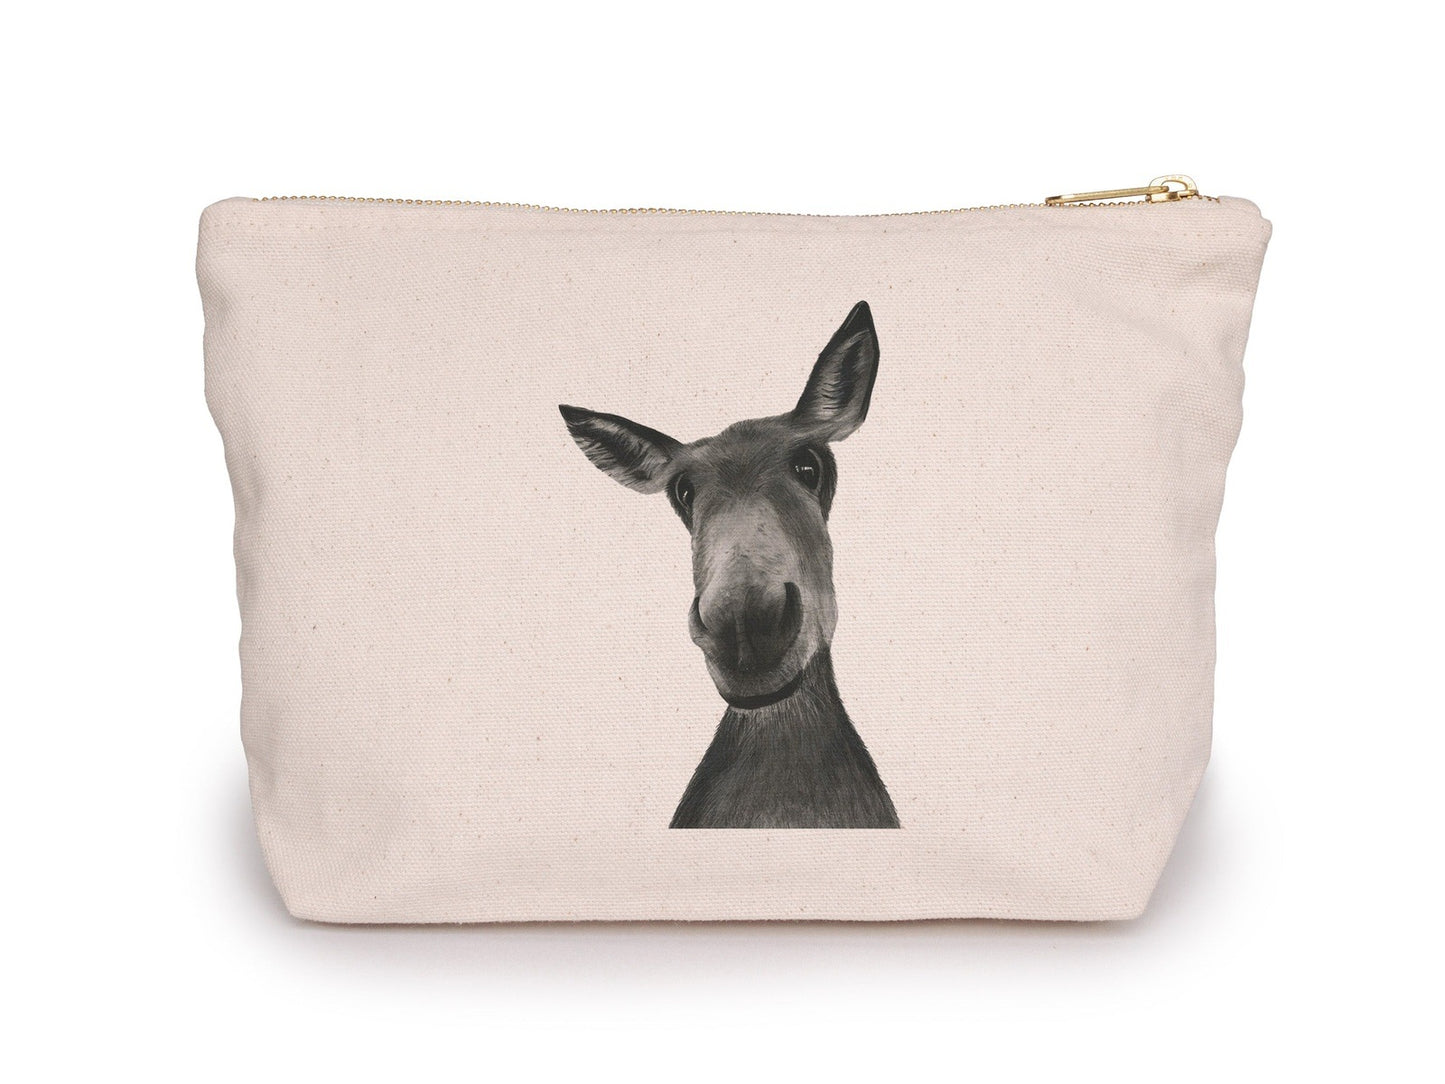 Donkey Pouch Bag From Libra Fine Arts